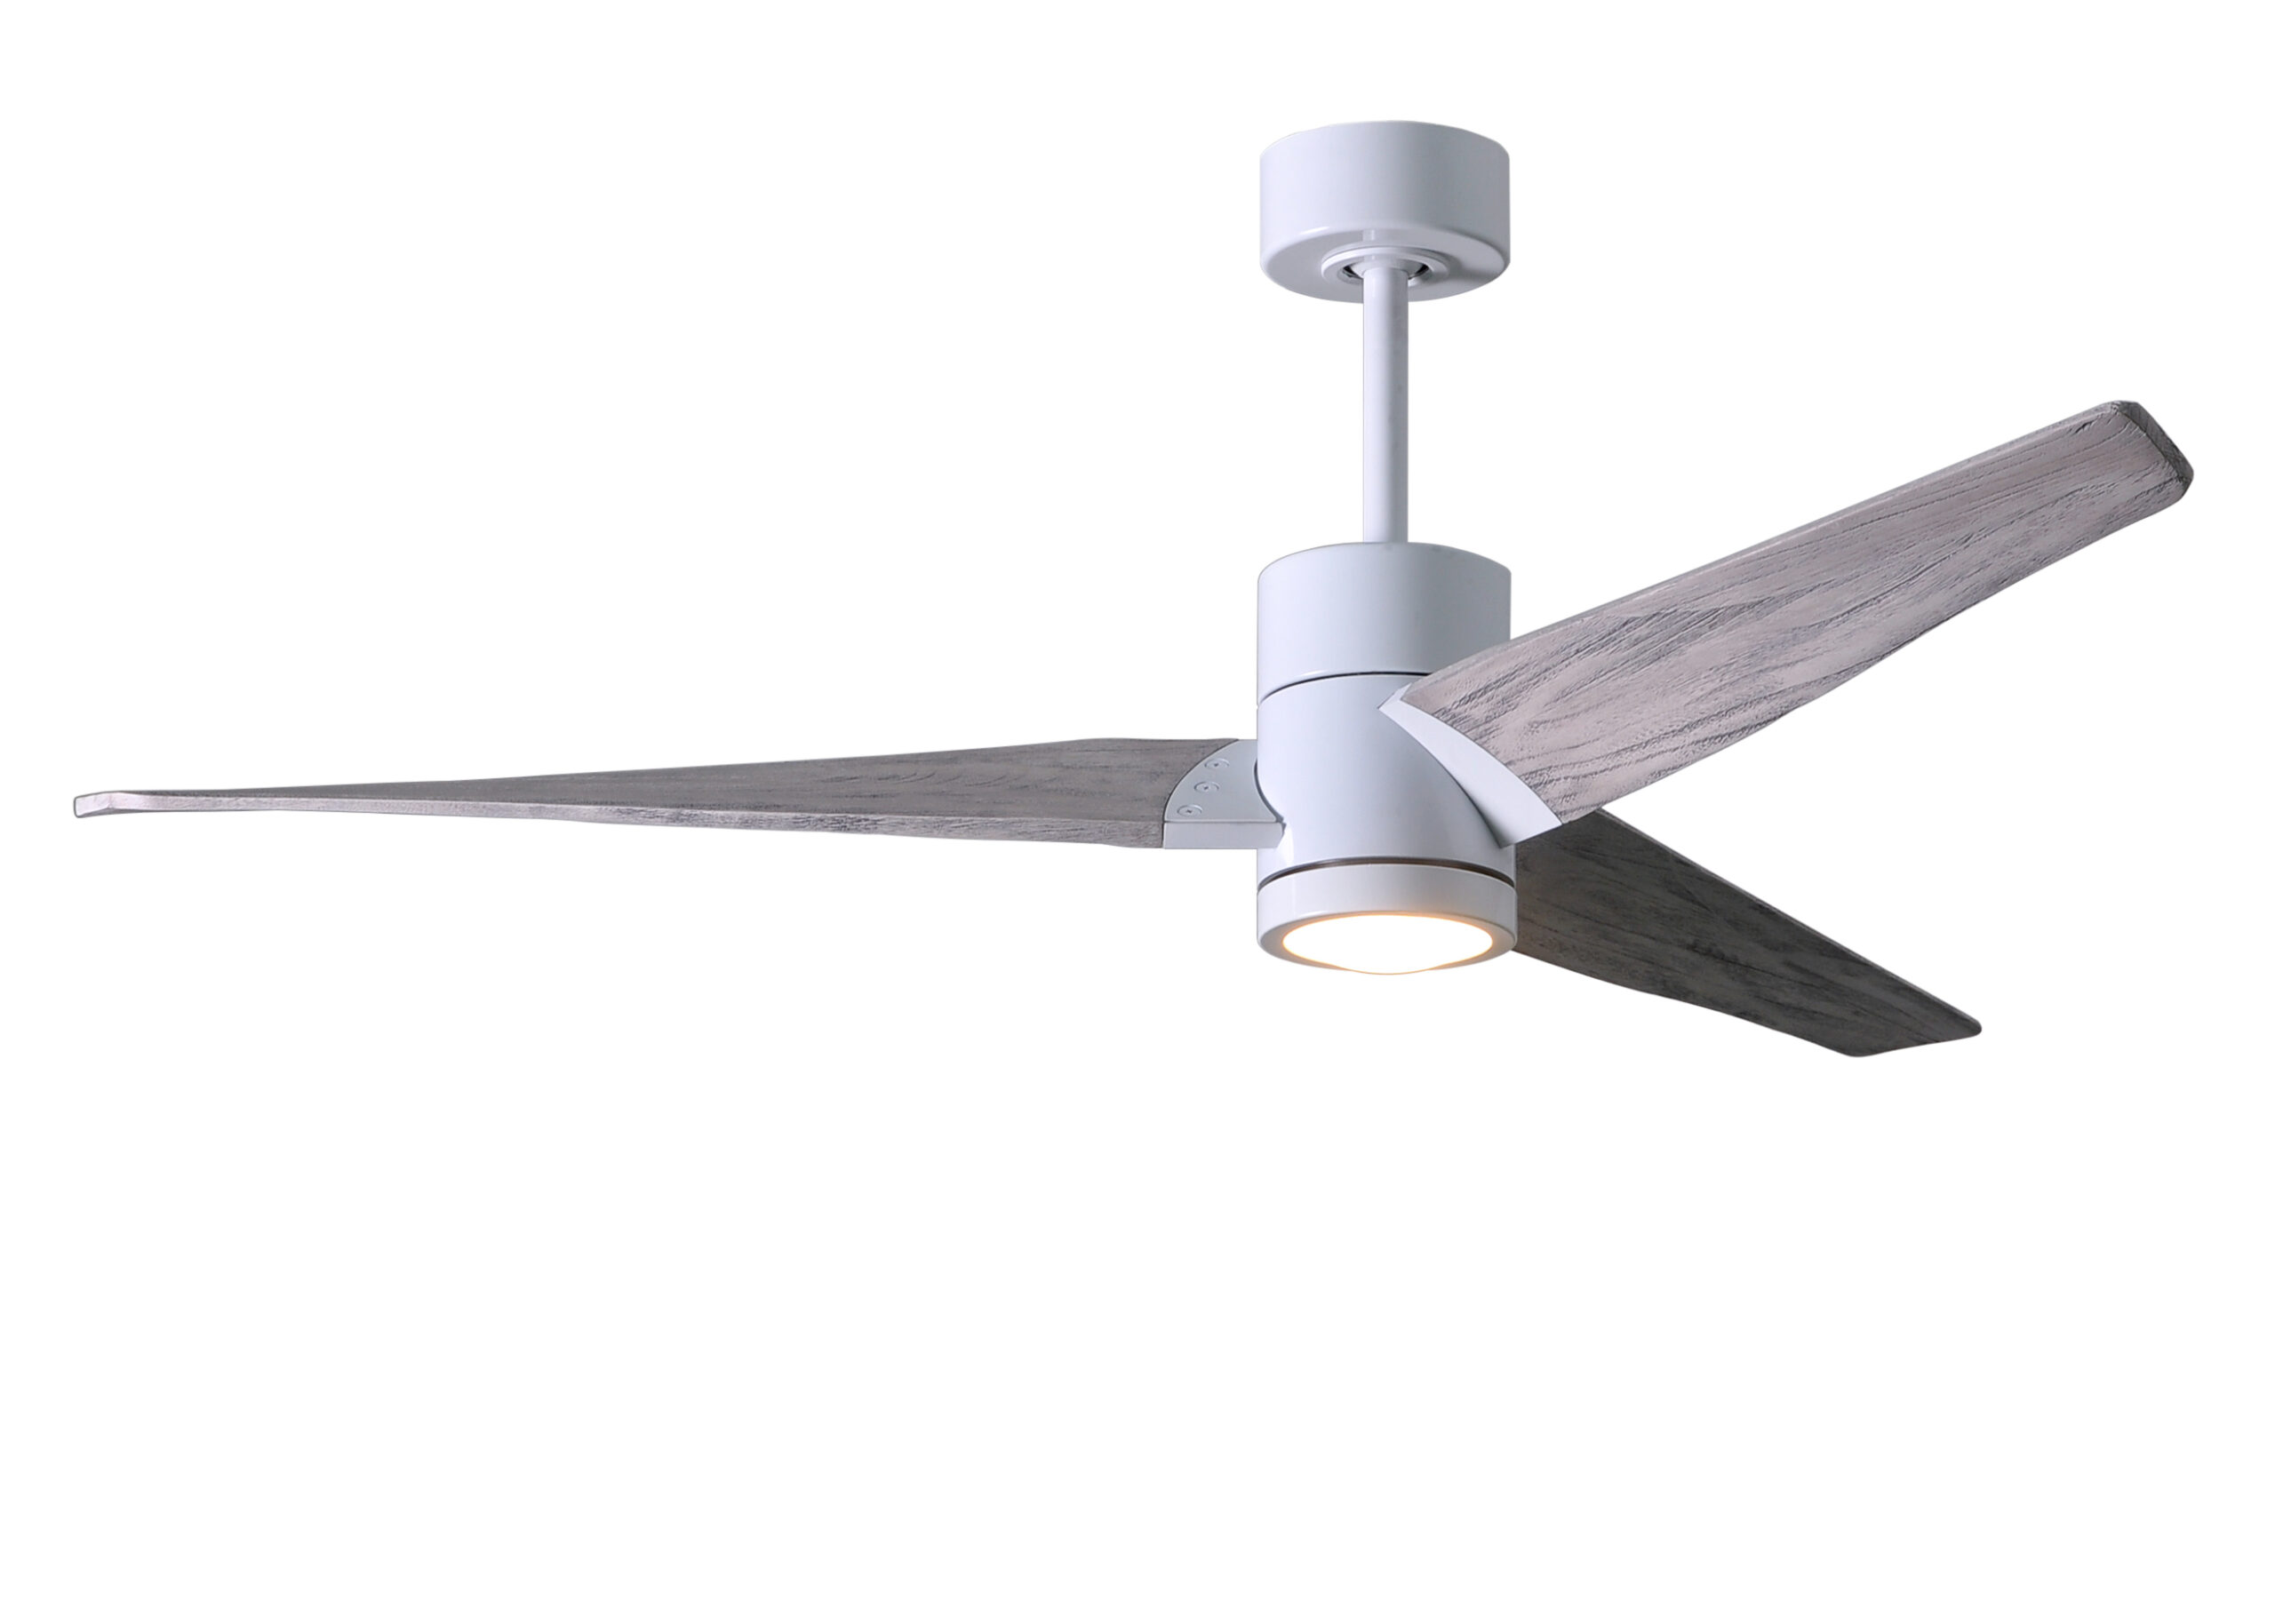 Super Janet Ceiling Fan in Gloss White with 60” Barn Wood Blades